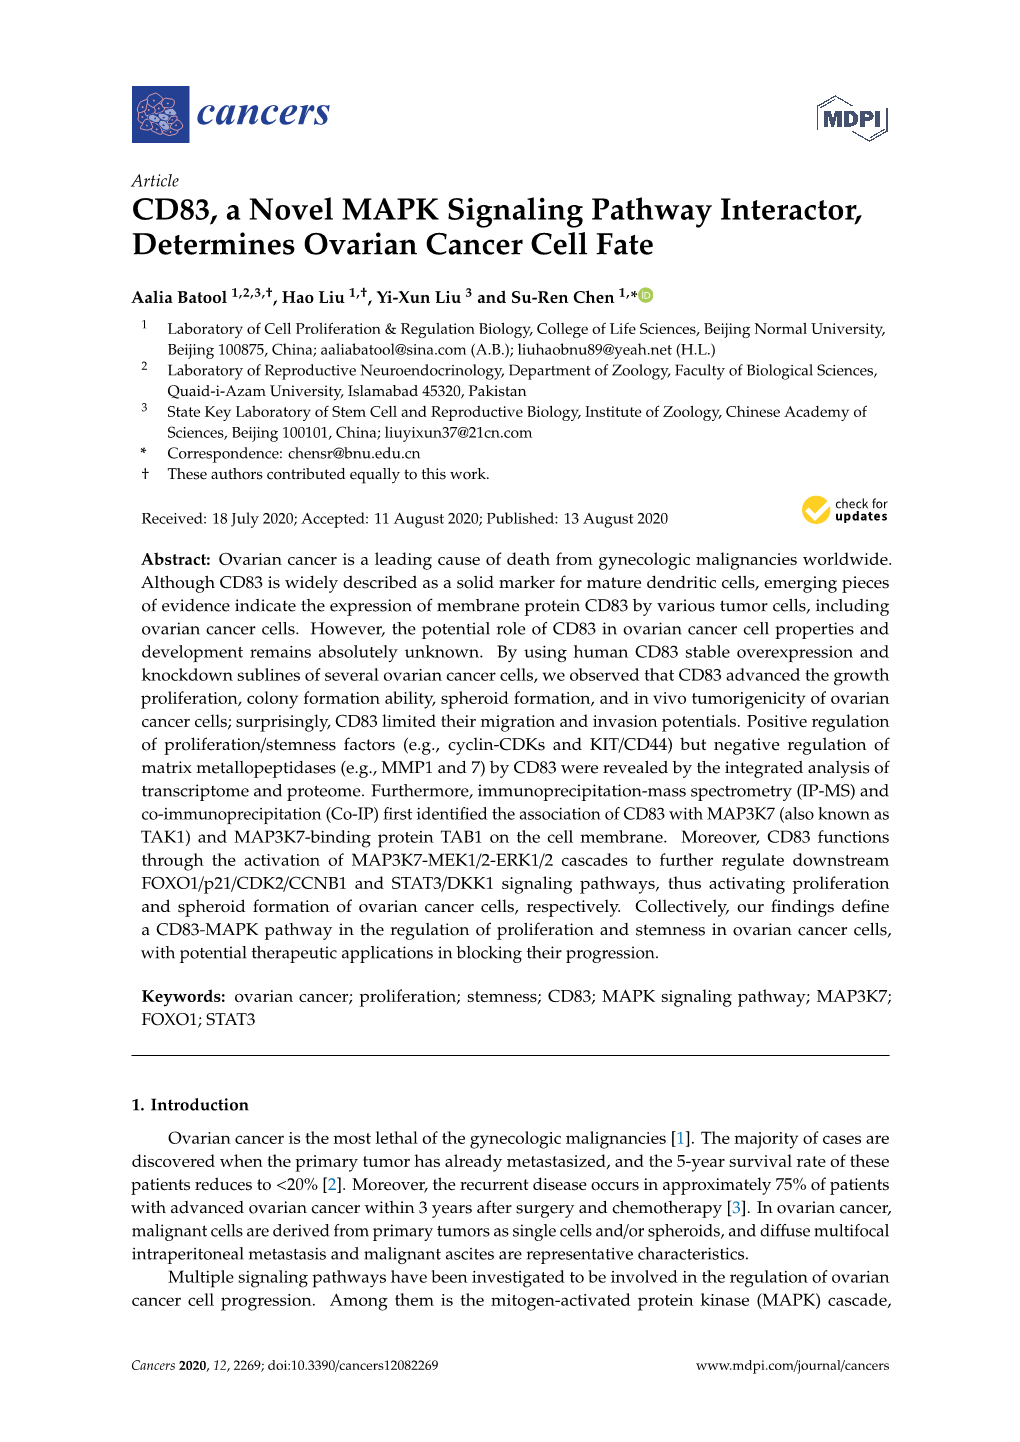 CD83, a Novel MAPK Signaling Pathway Interactor, Determines Ovarian Cancer Cell Fate